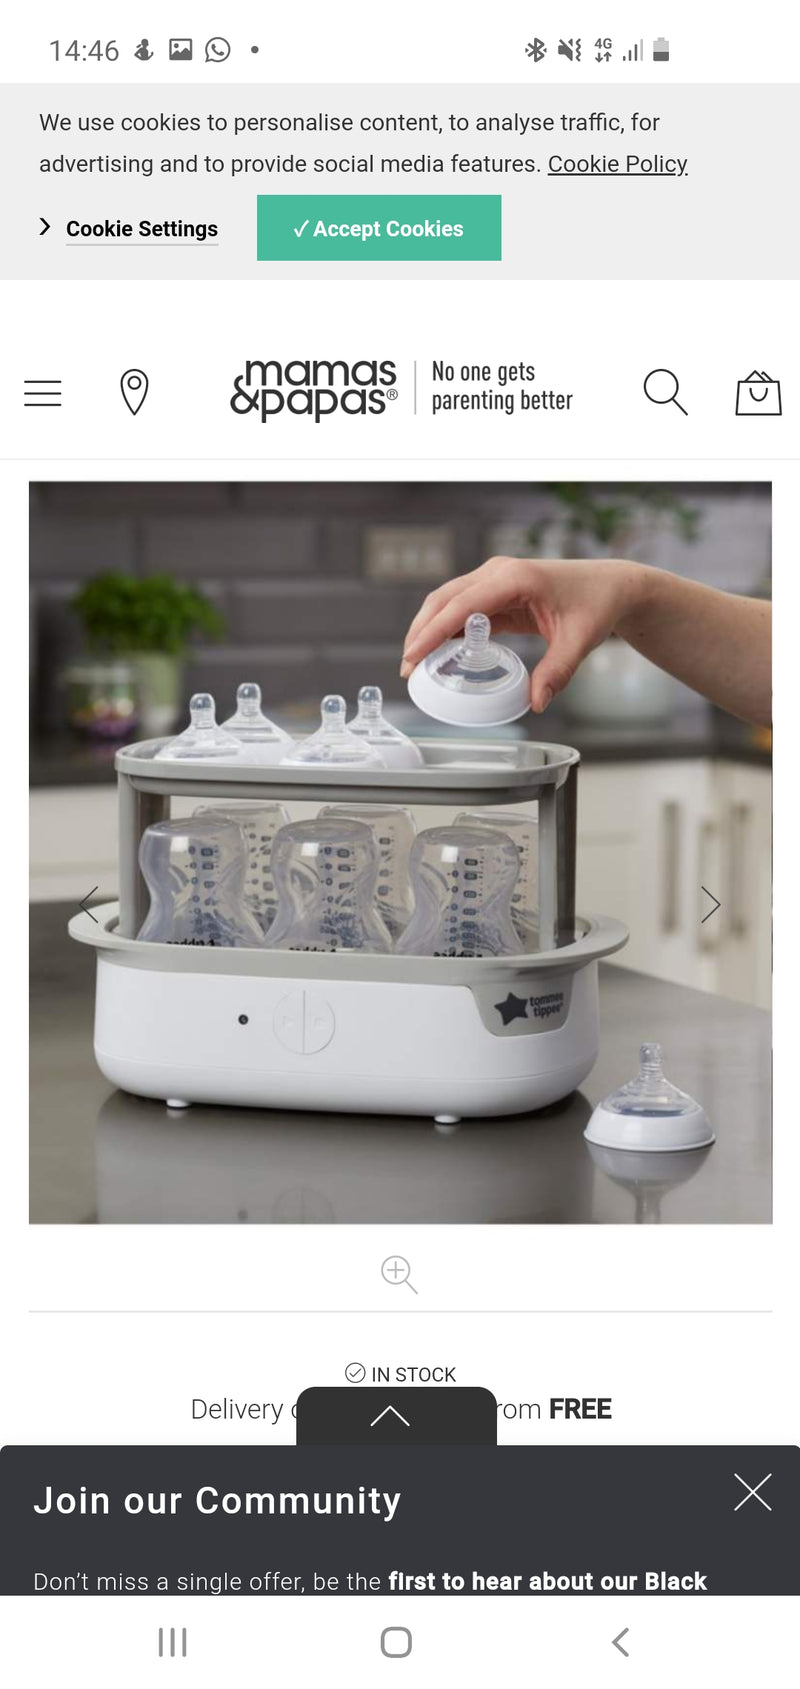 Tommee Tippee Electric Steraliser